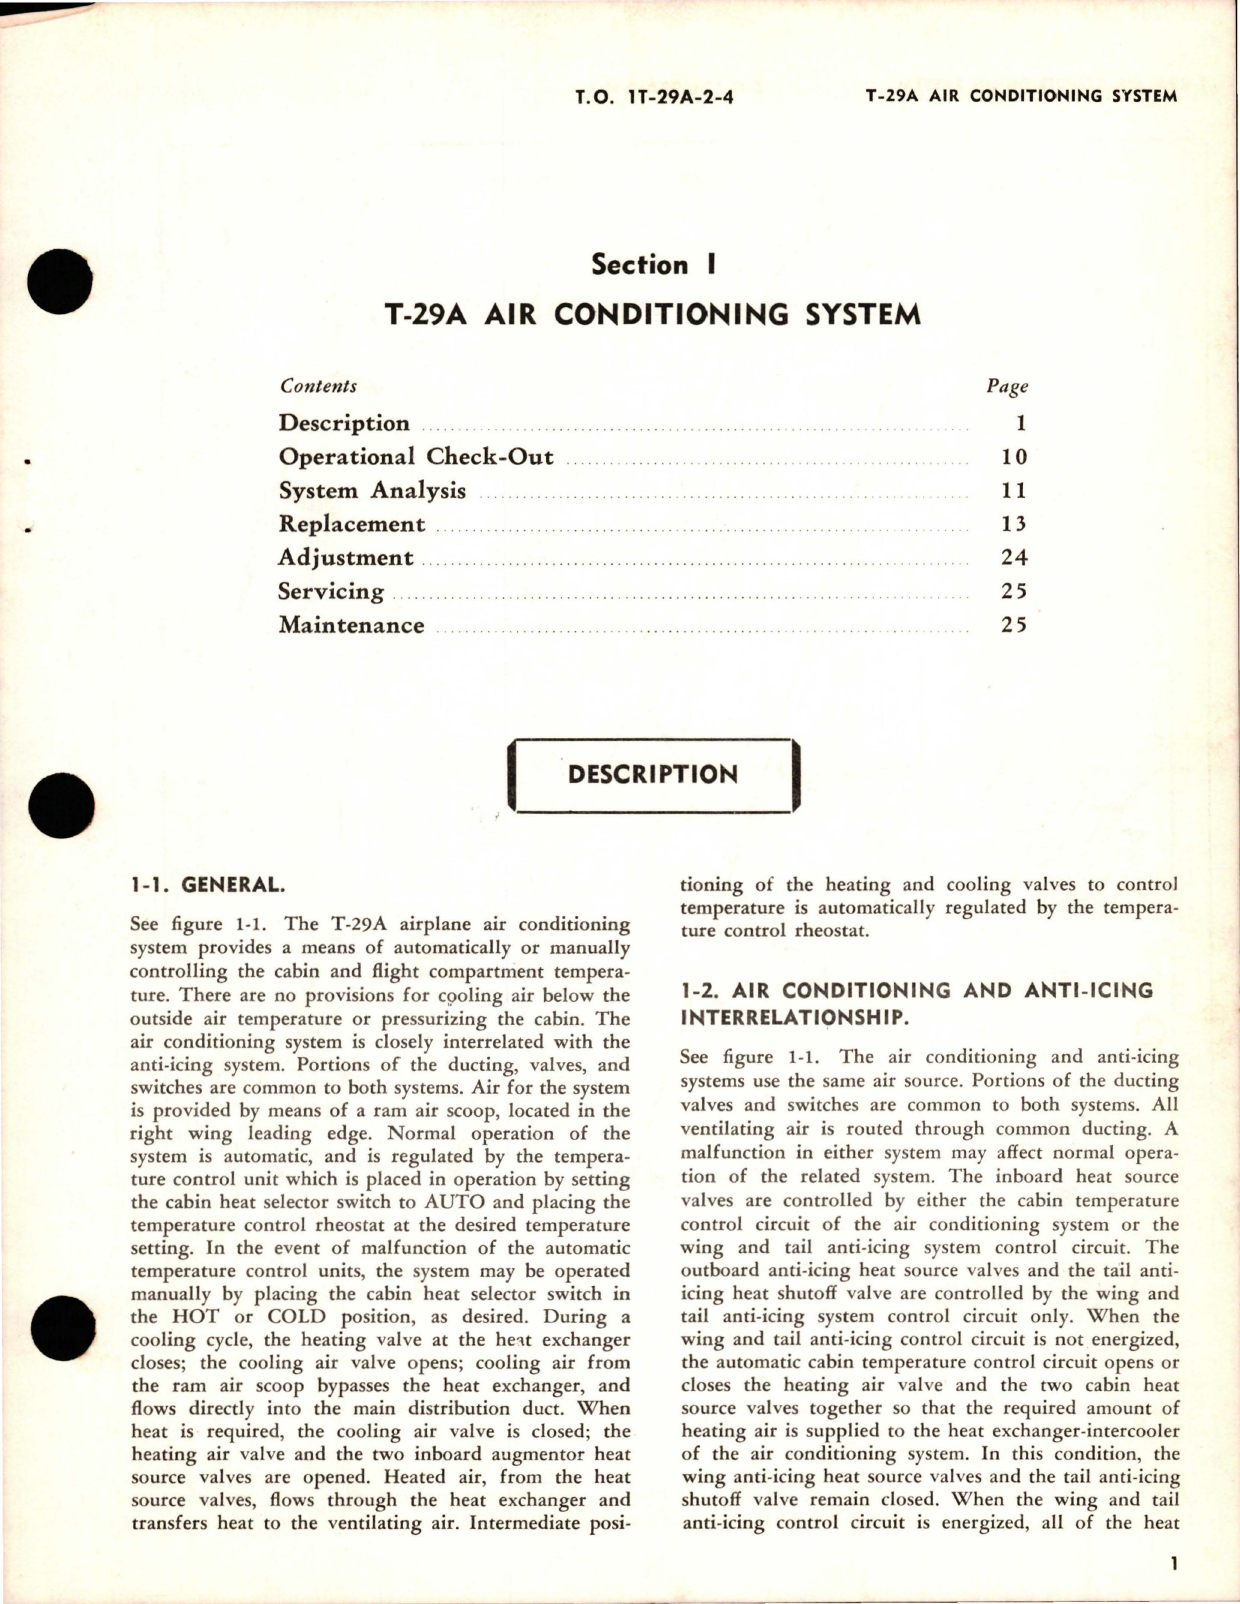 Sample page 9 from AirCorps Library document: Maintenance for Utility Systems for T-29A, T-29B, T-29C and T-29D